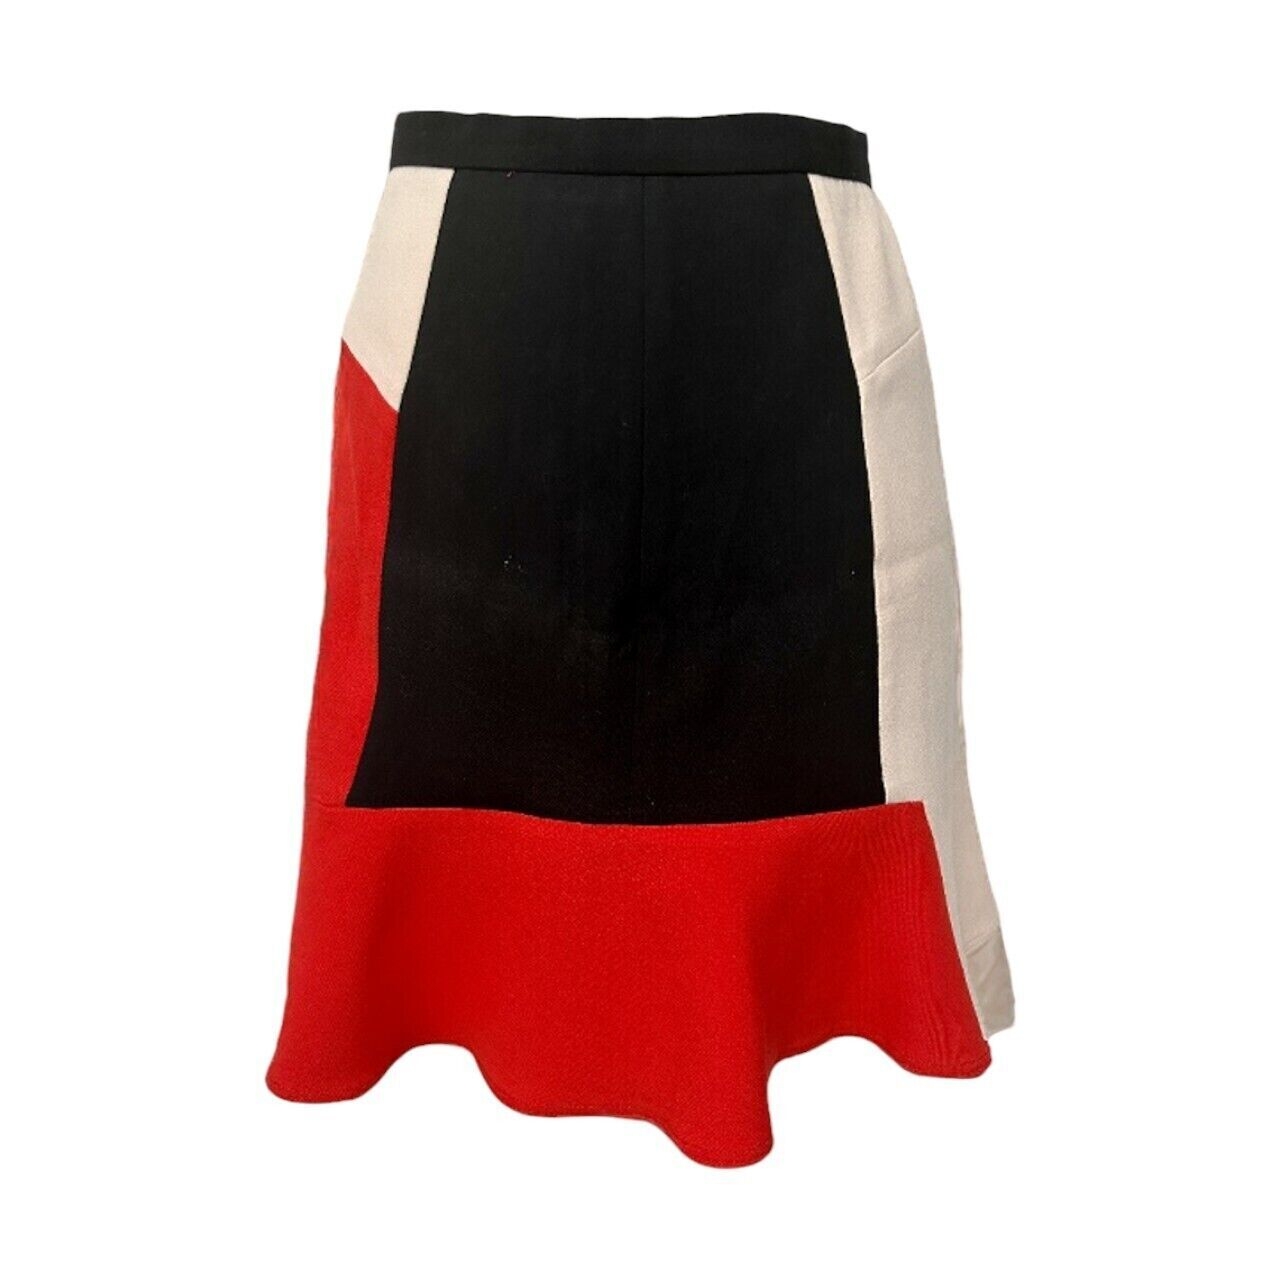 Zara Flare Color Block Mini Skirt in Red, Pink, and Black 